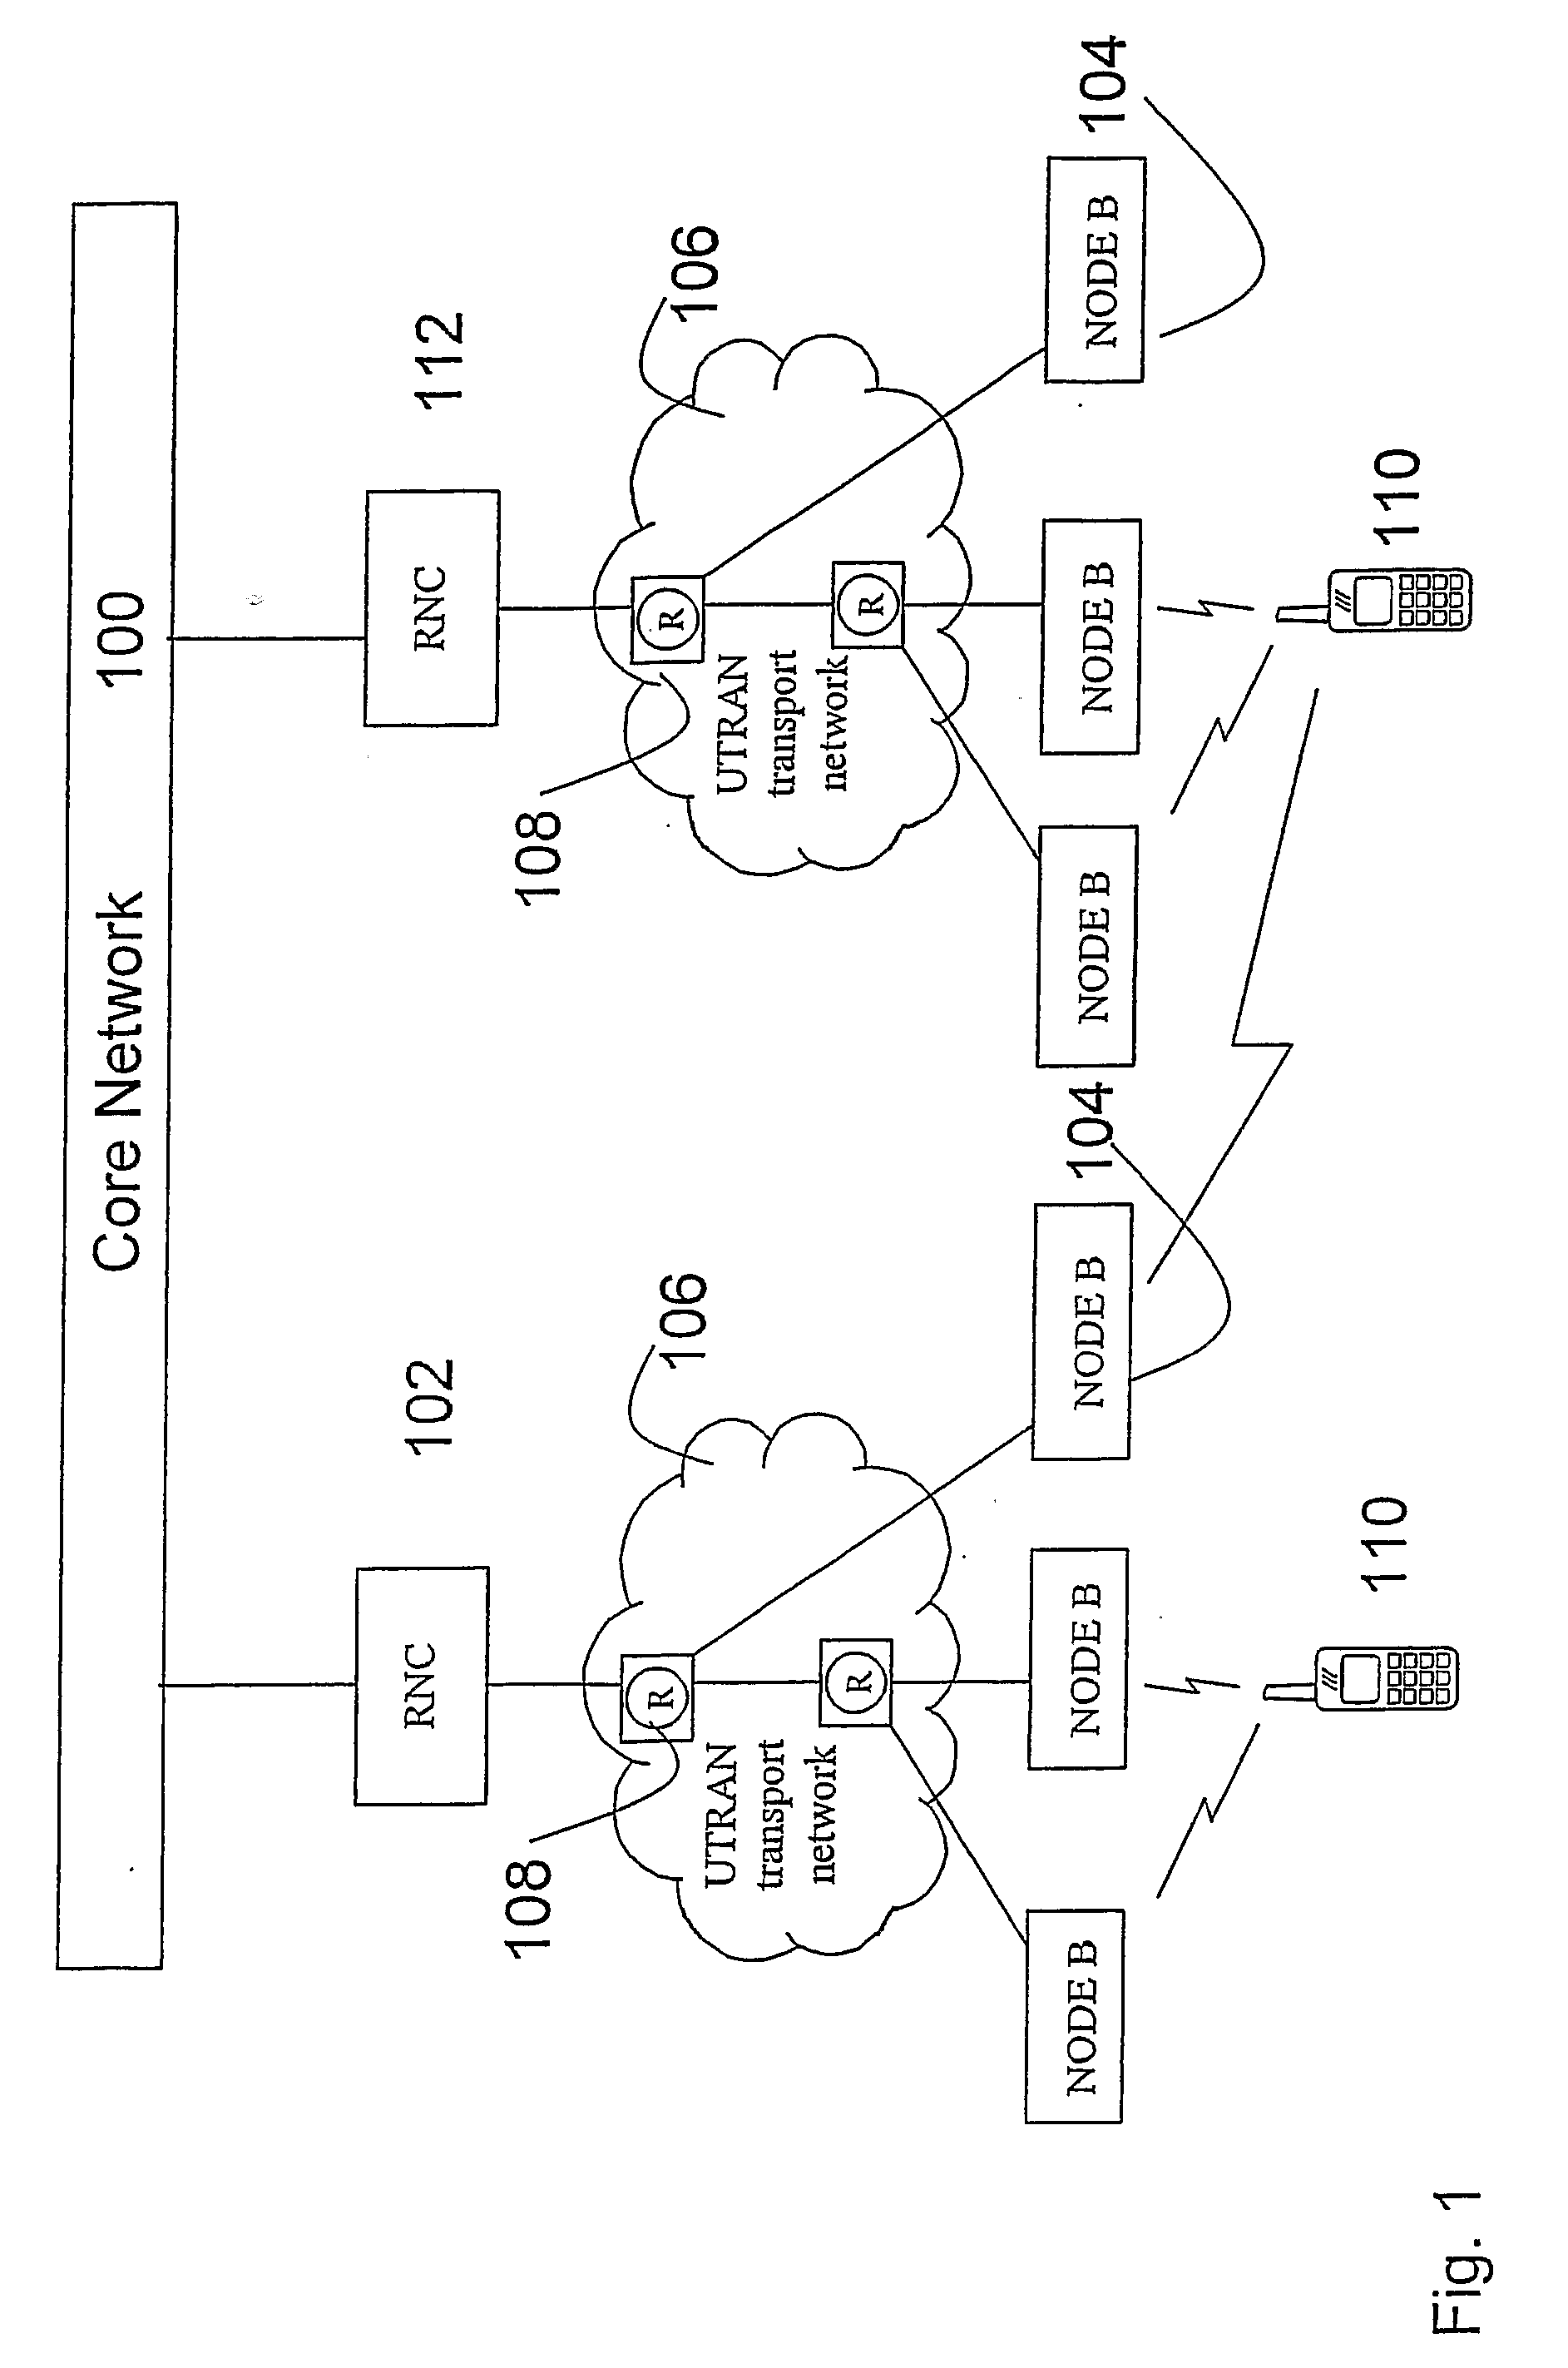 Arrangements and method for handling macro diversity in a universal mobile telecommunications system